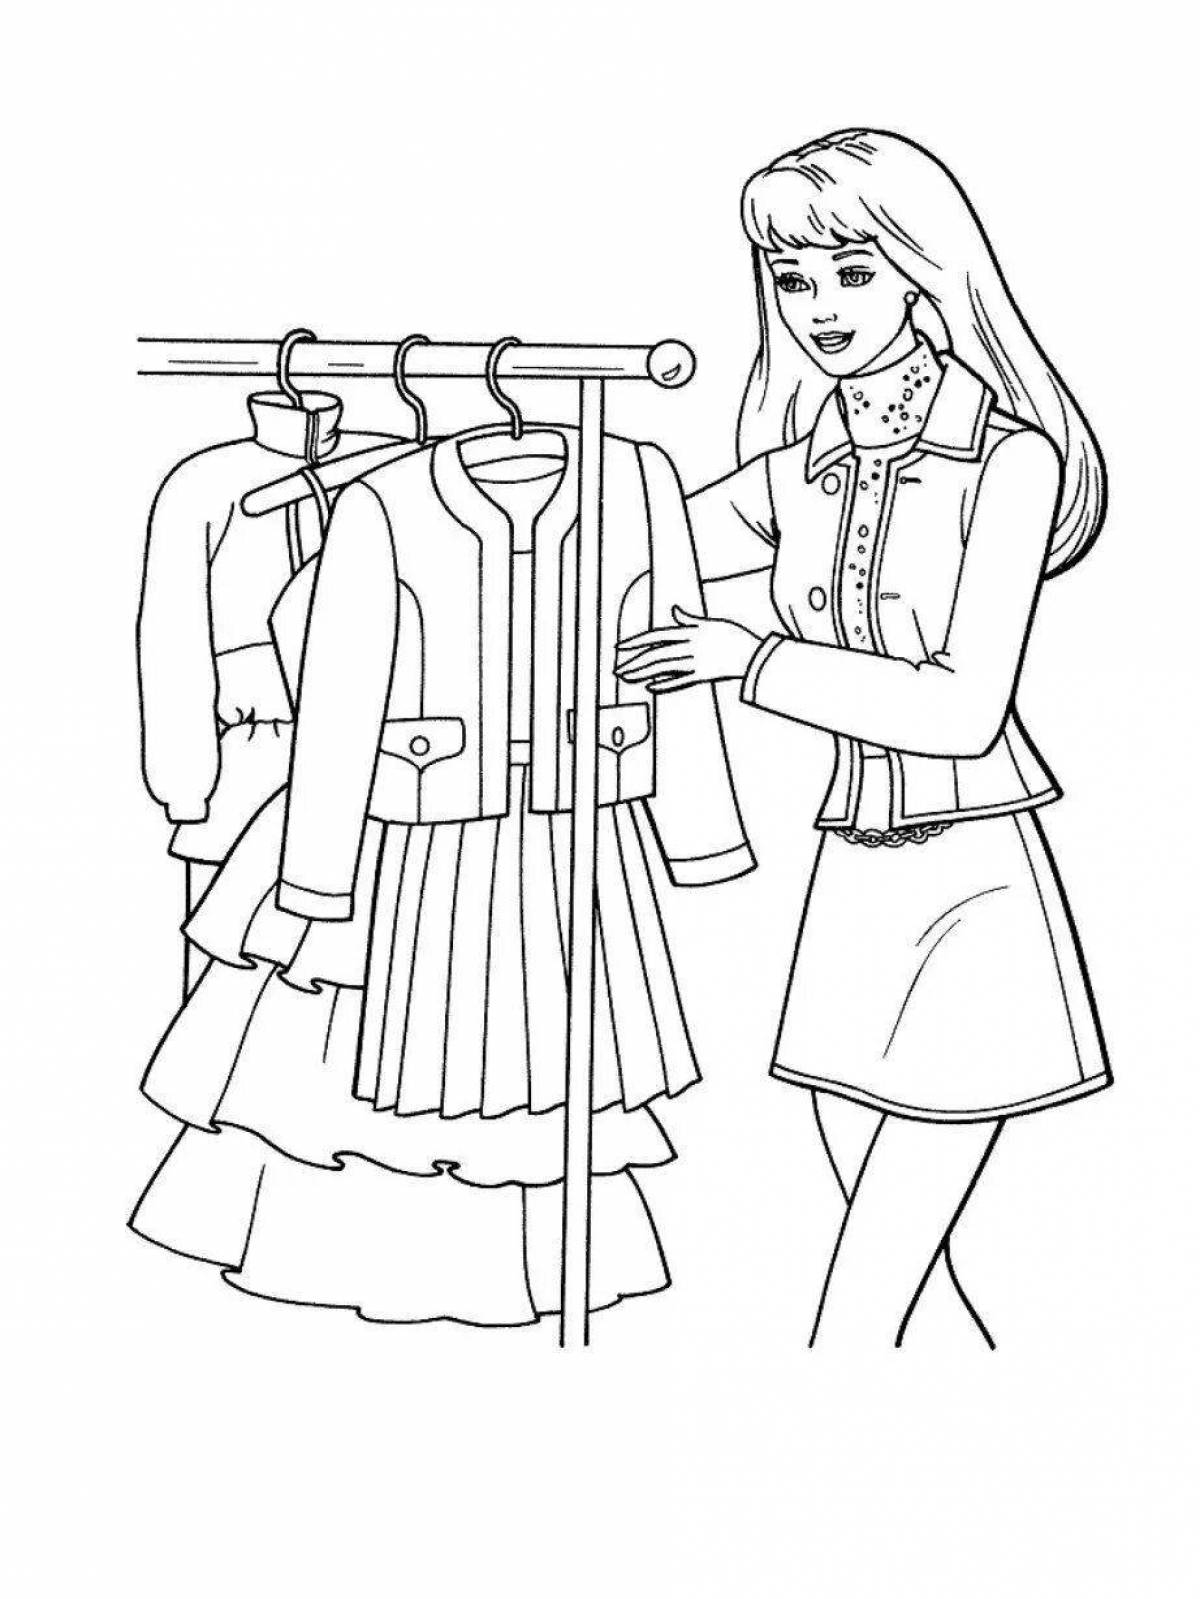 Exquisite outfits for coloring barbie